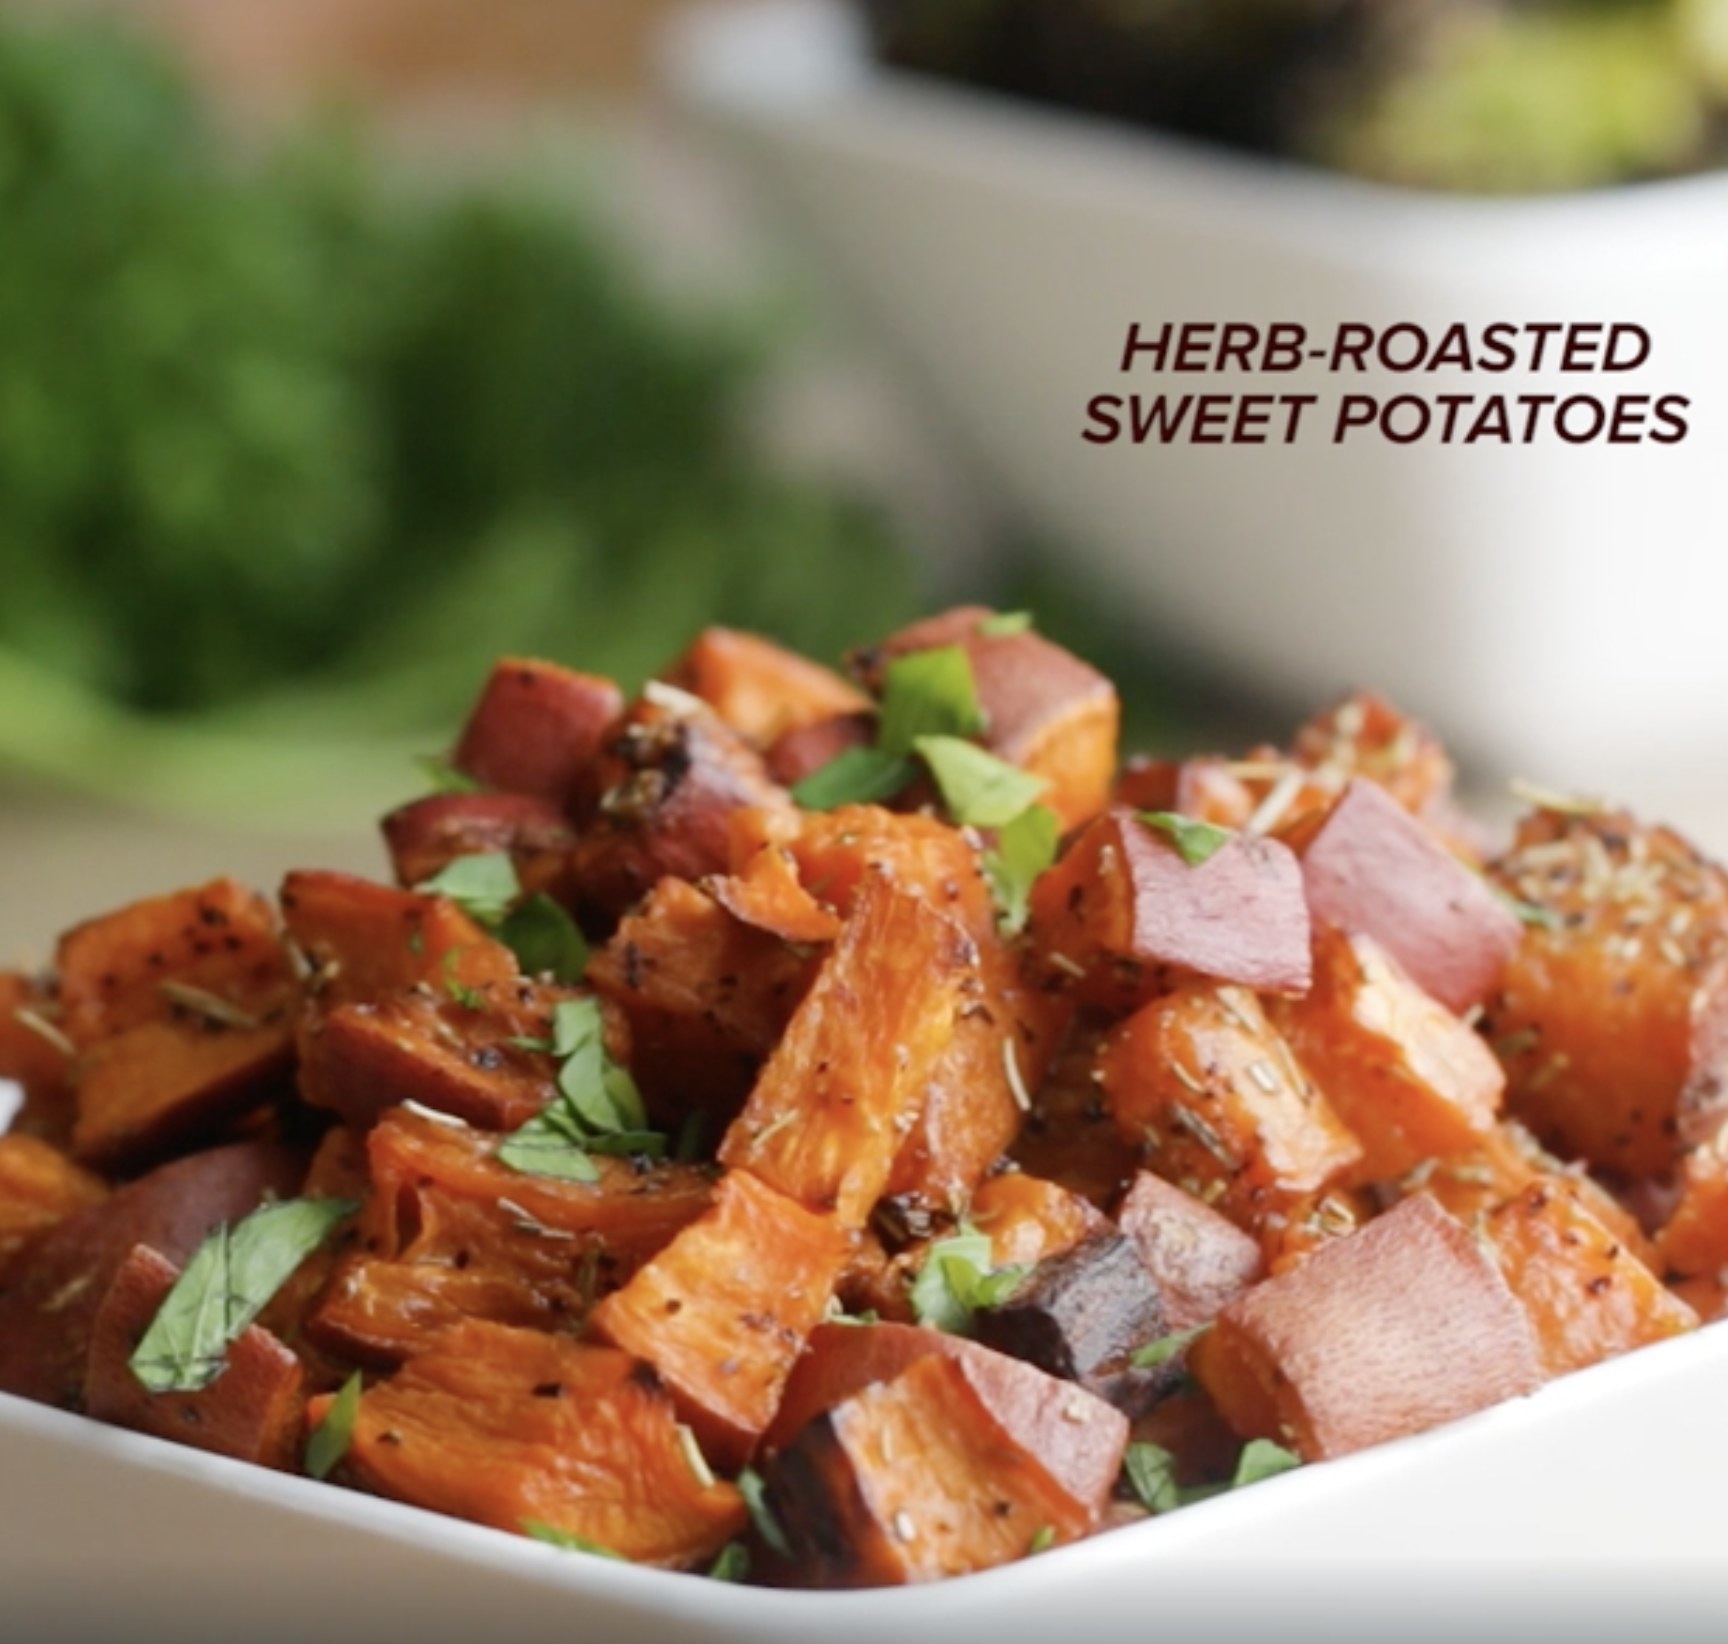 A bowl of herb-roasted sweet potatoes